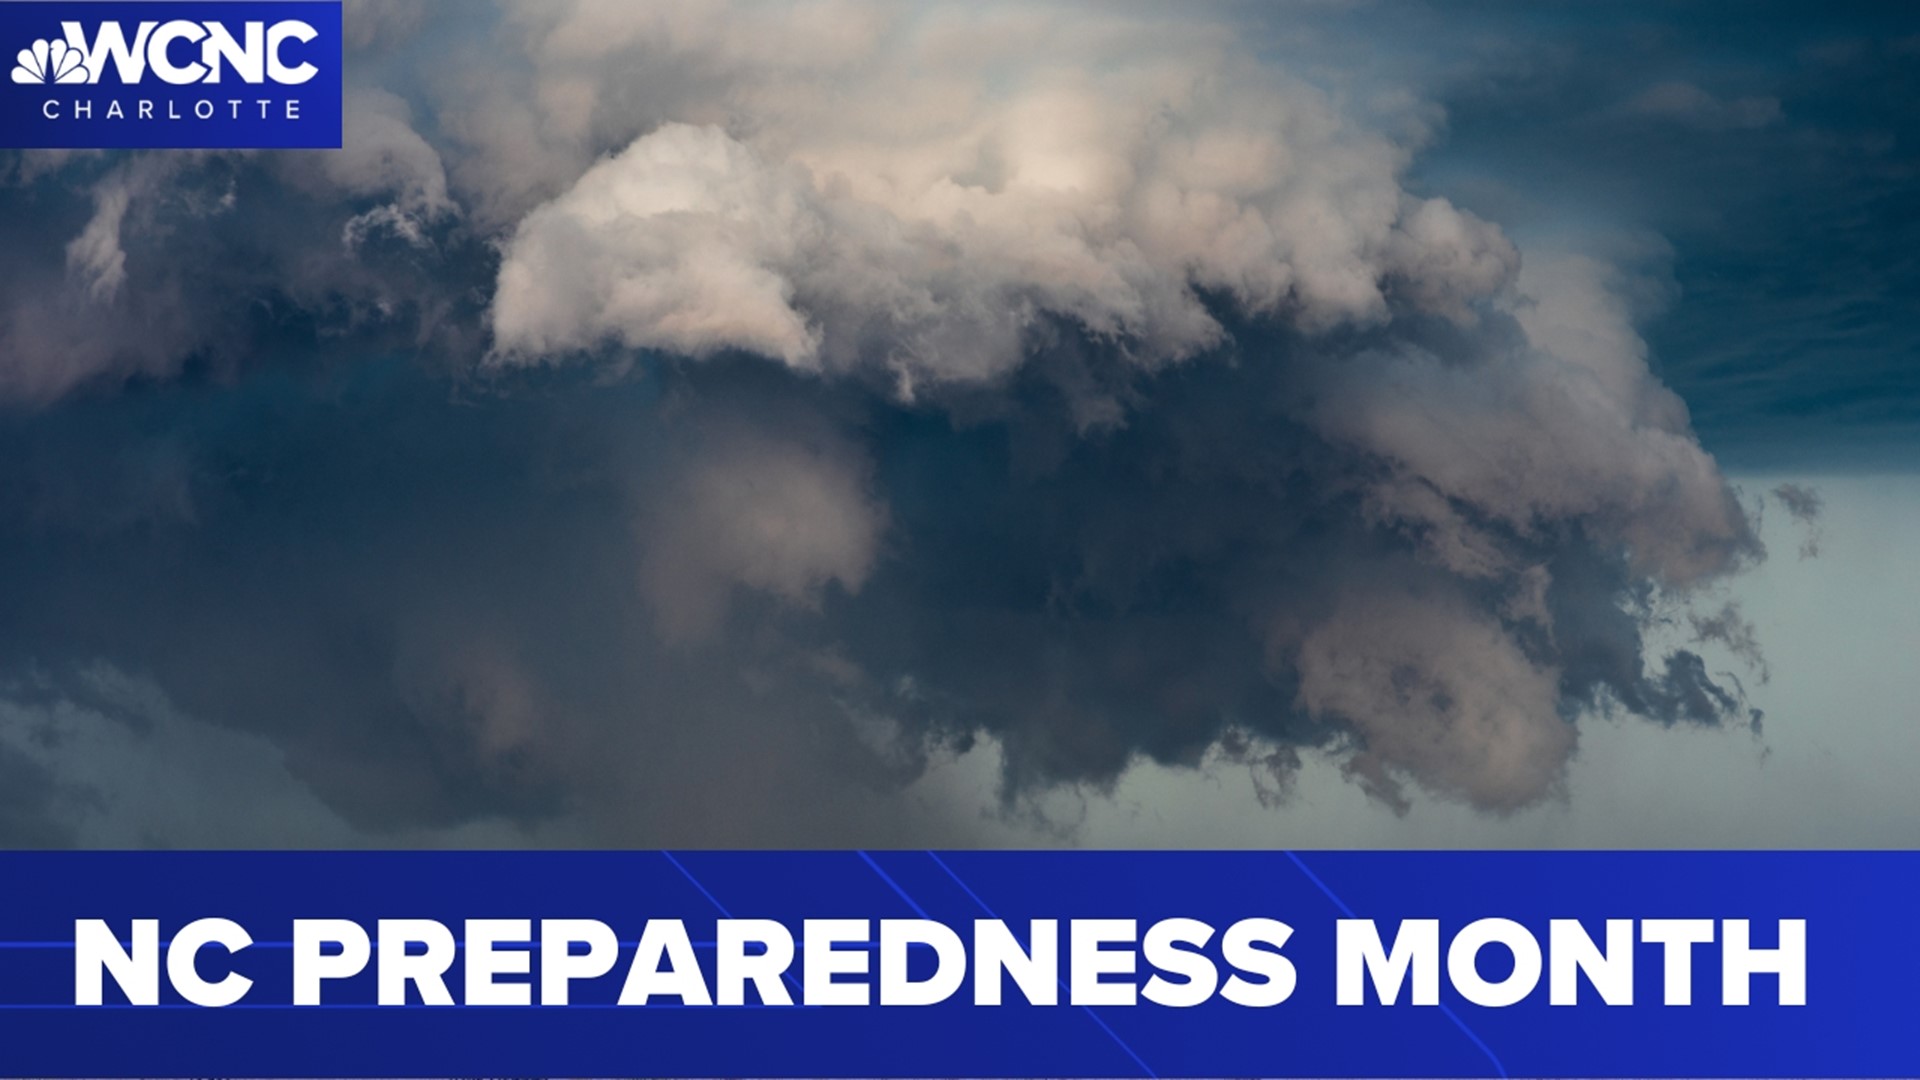 As August kicks off, state officials remind families to have an emergency plan ready for storms.